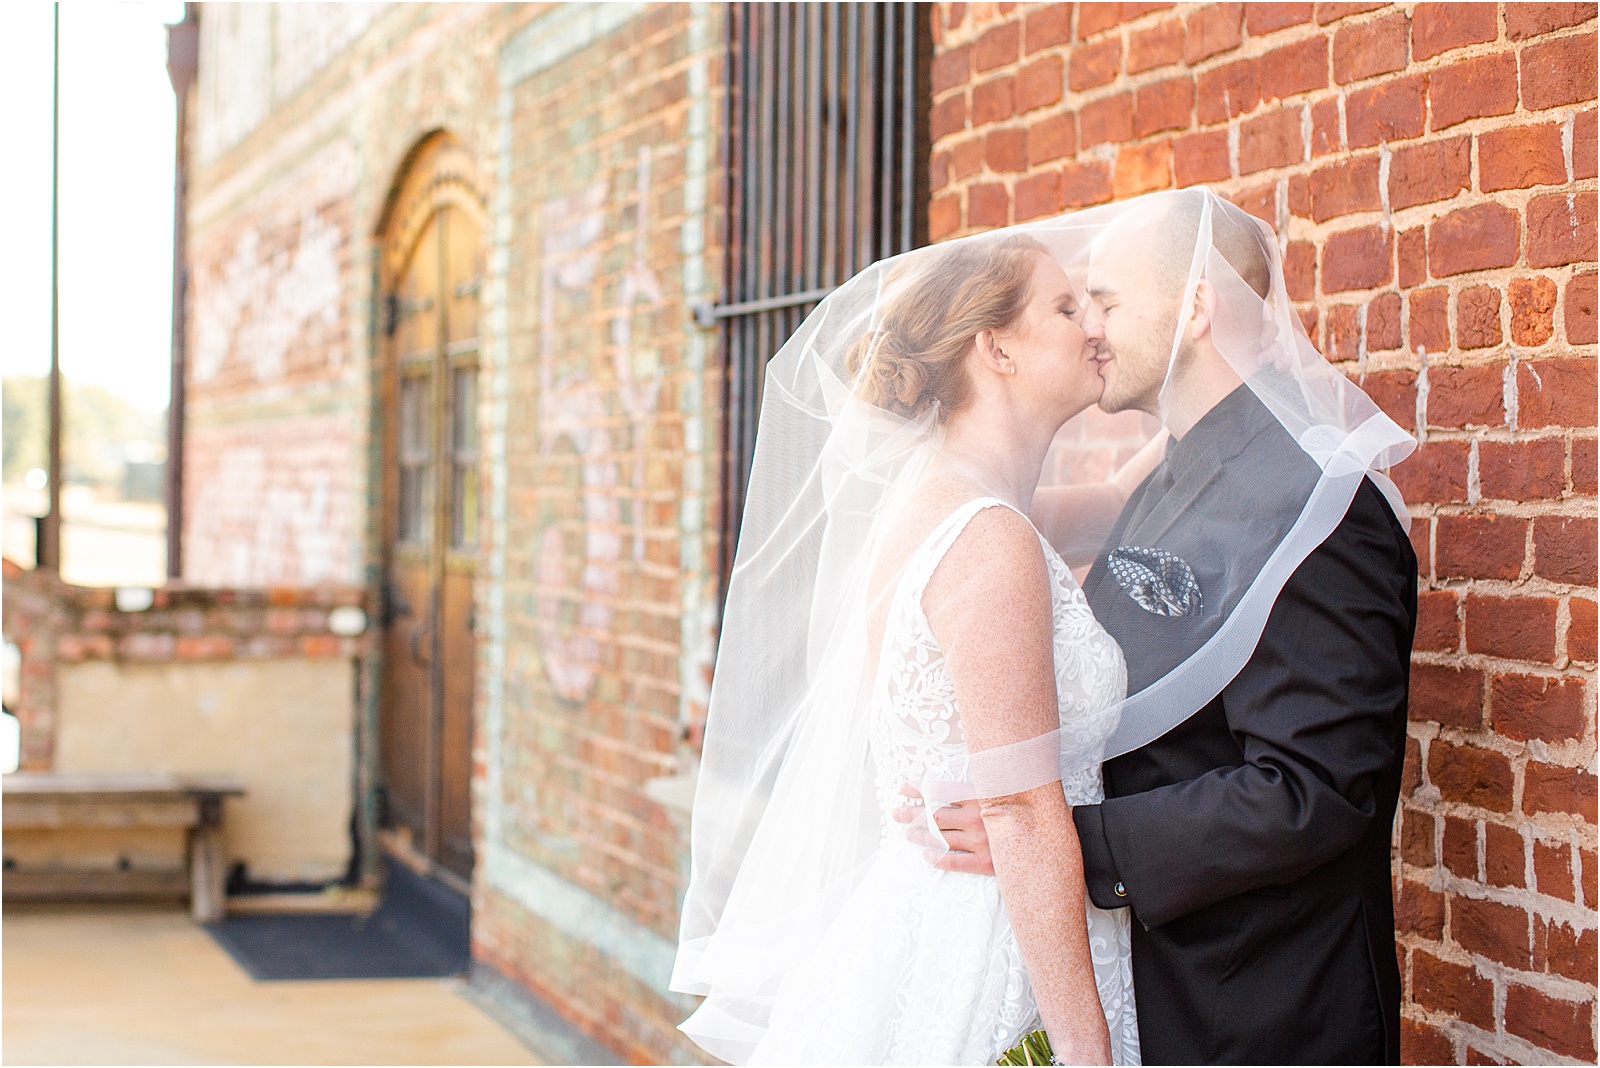 veil draped over newlyweds as they kiss